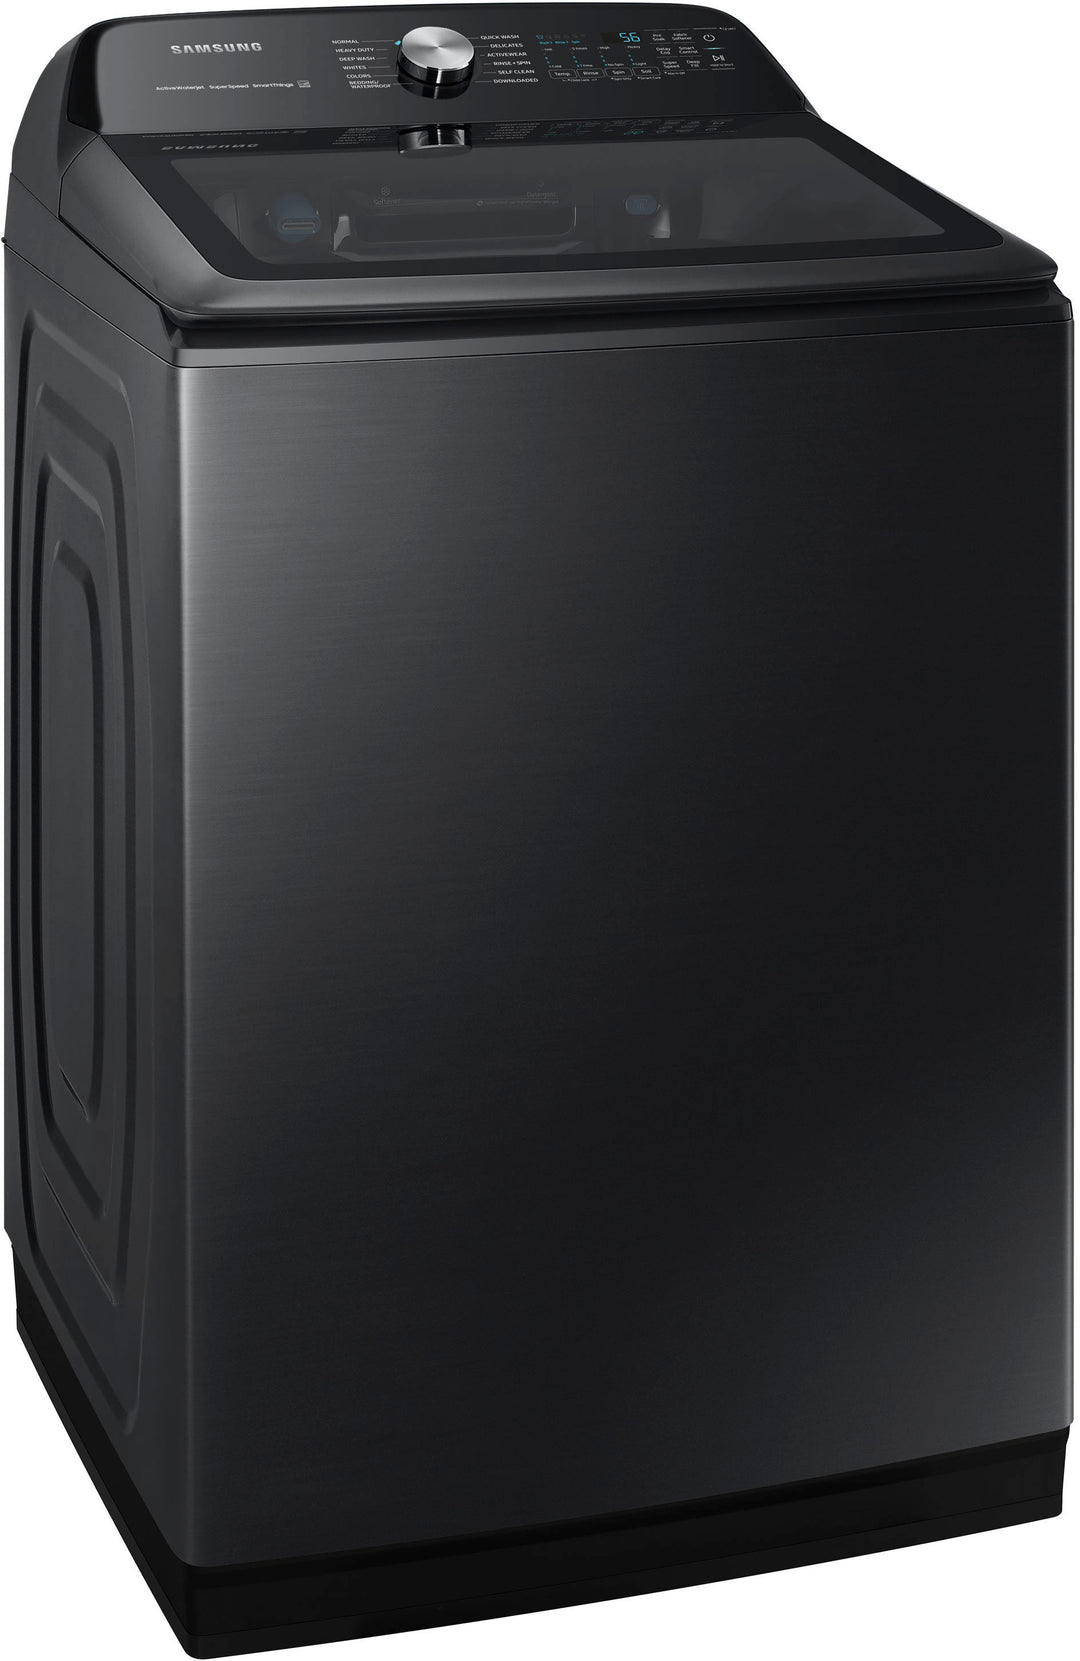 Samsung - 5.1 cu. ft. Smart Top Load Washer with ActiveWave Agitator and Super Speed Wash - Brushed Black_10